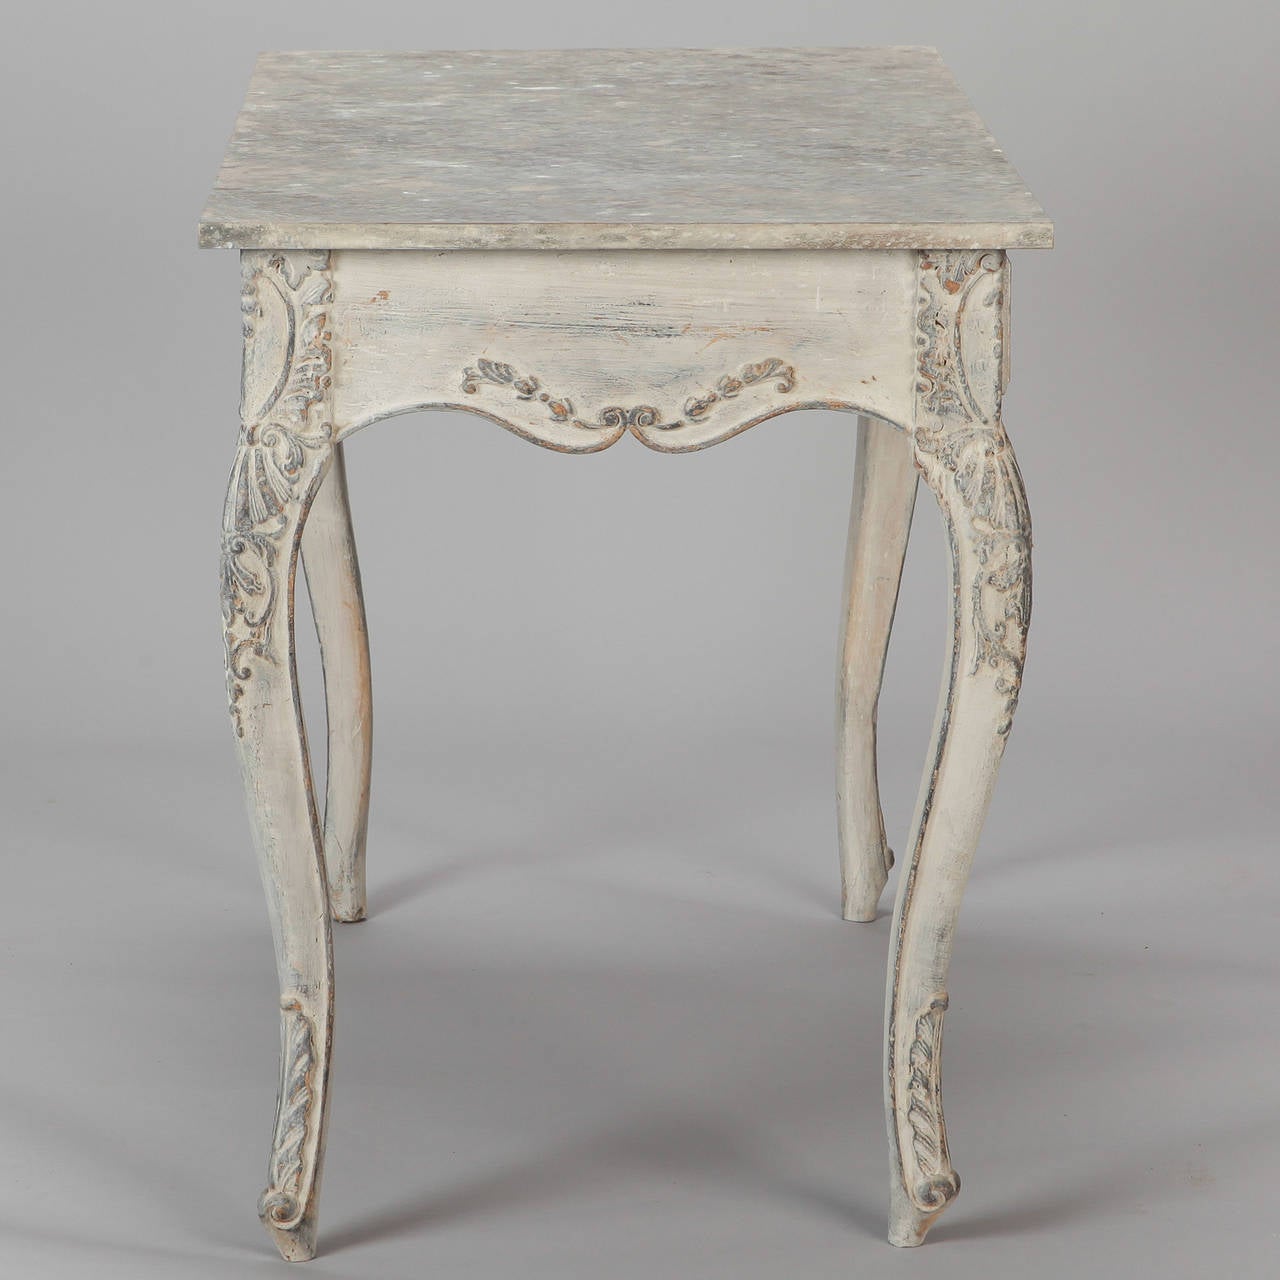 Wood Painted French Table with Carved Leaves and Flowers